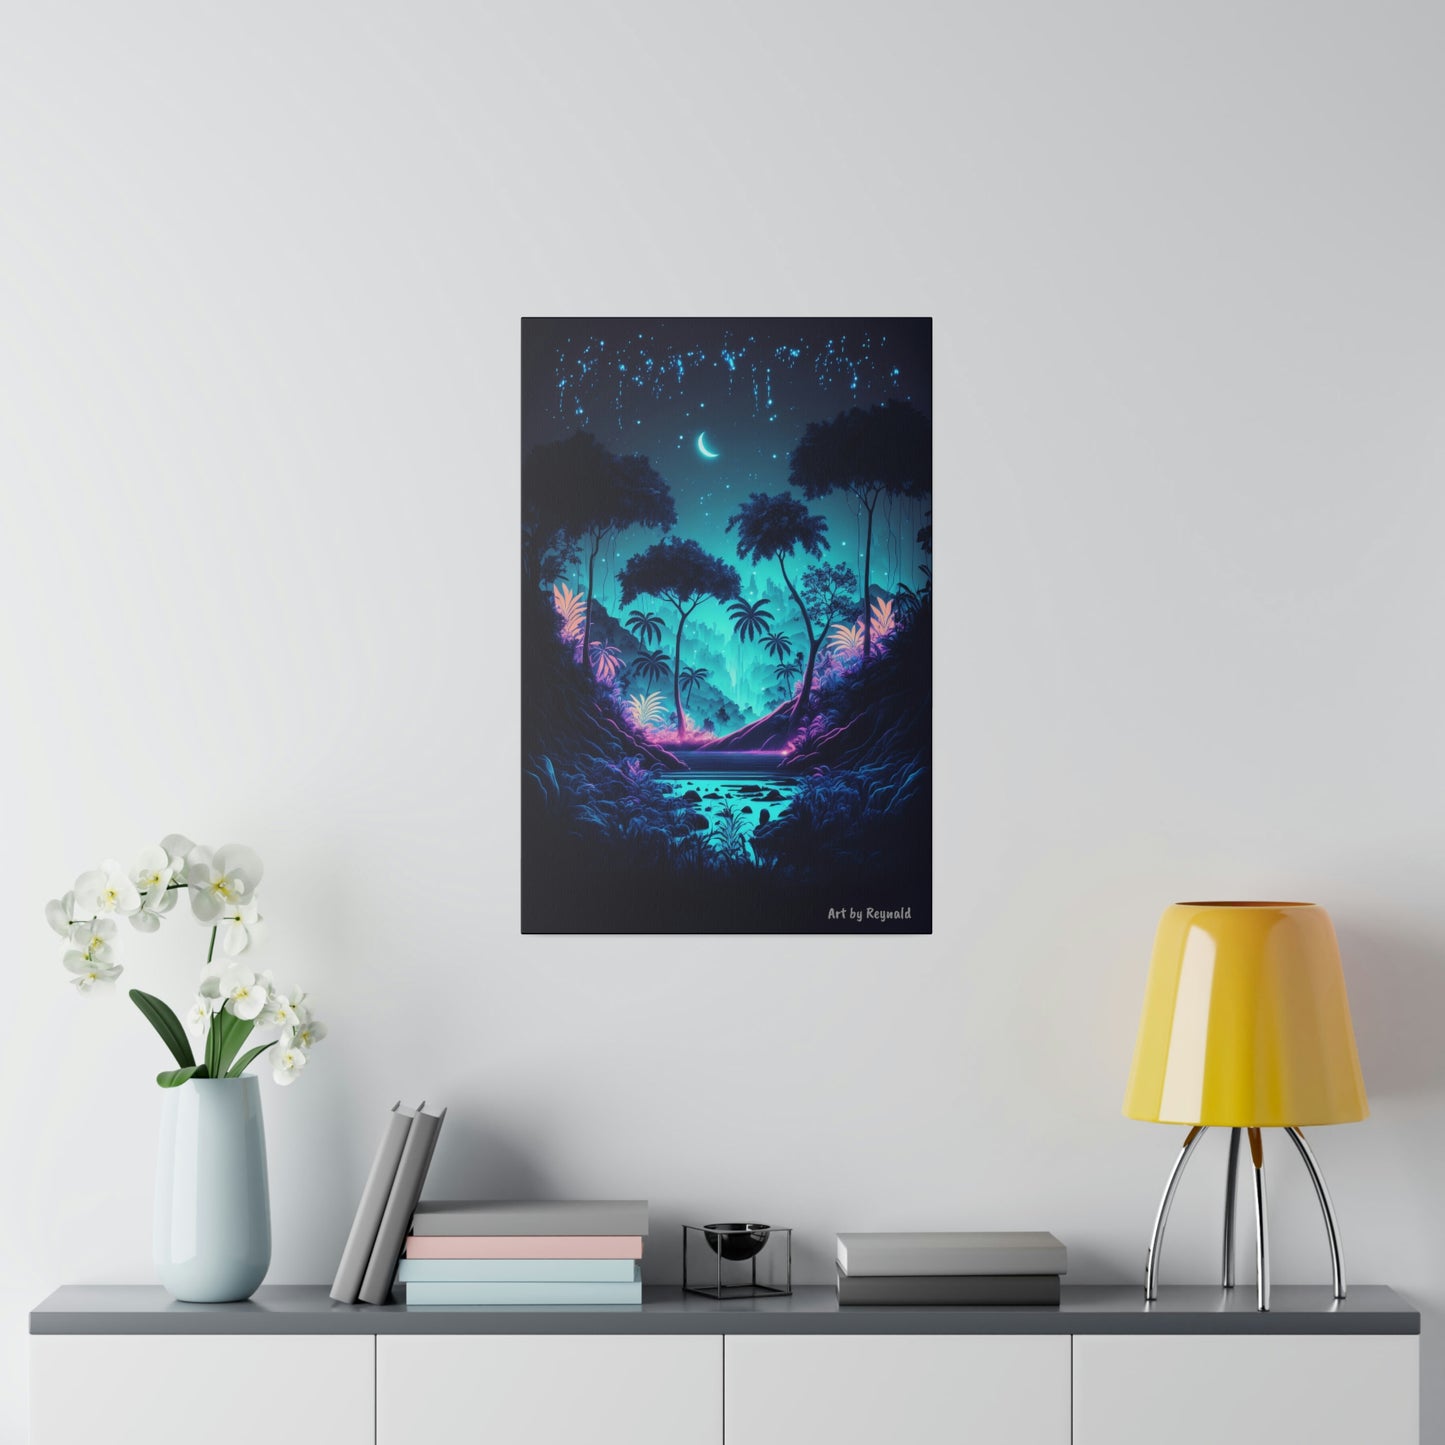 Neon Forest 4 - 16"x24" Matte Canvas, Stretched, 0.75"